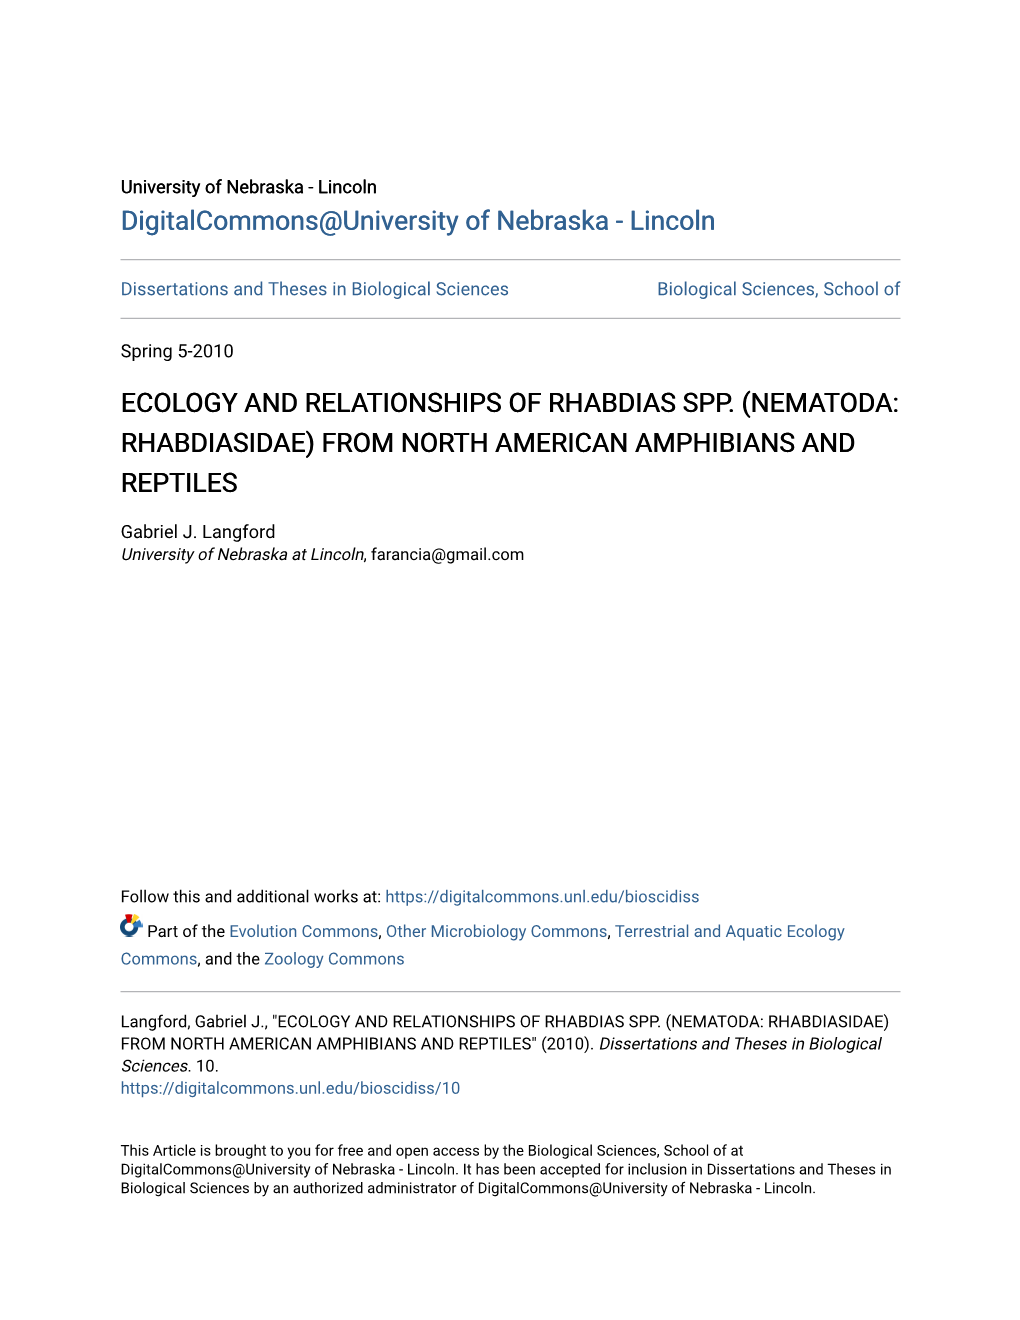 Ecology and Relationships of Rhabdias Spp. (Nematoda: Rhabdiasidae) from North American Amphibians and Reptiles